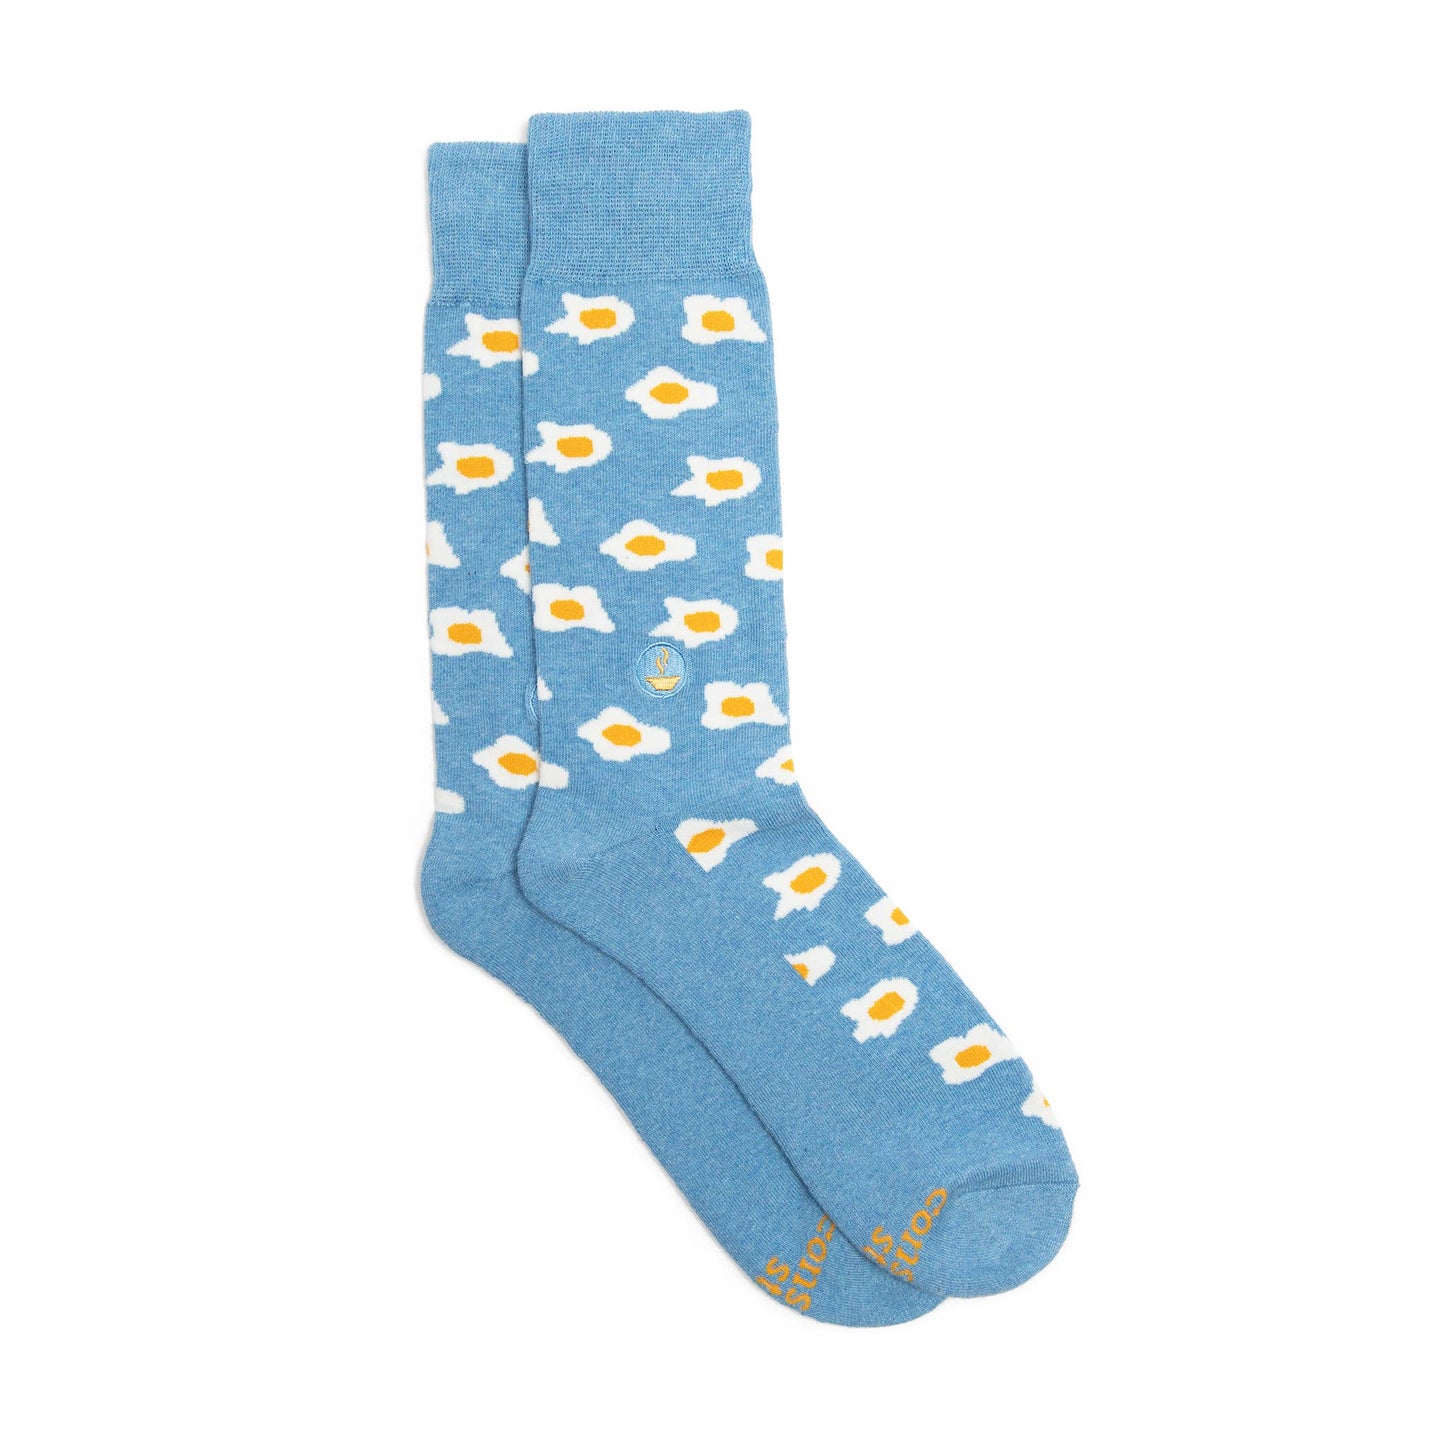 Socks that Provide Meals (Blue Eggs): Small